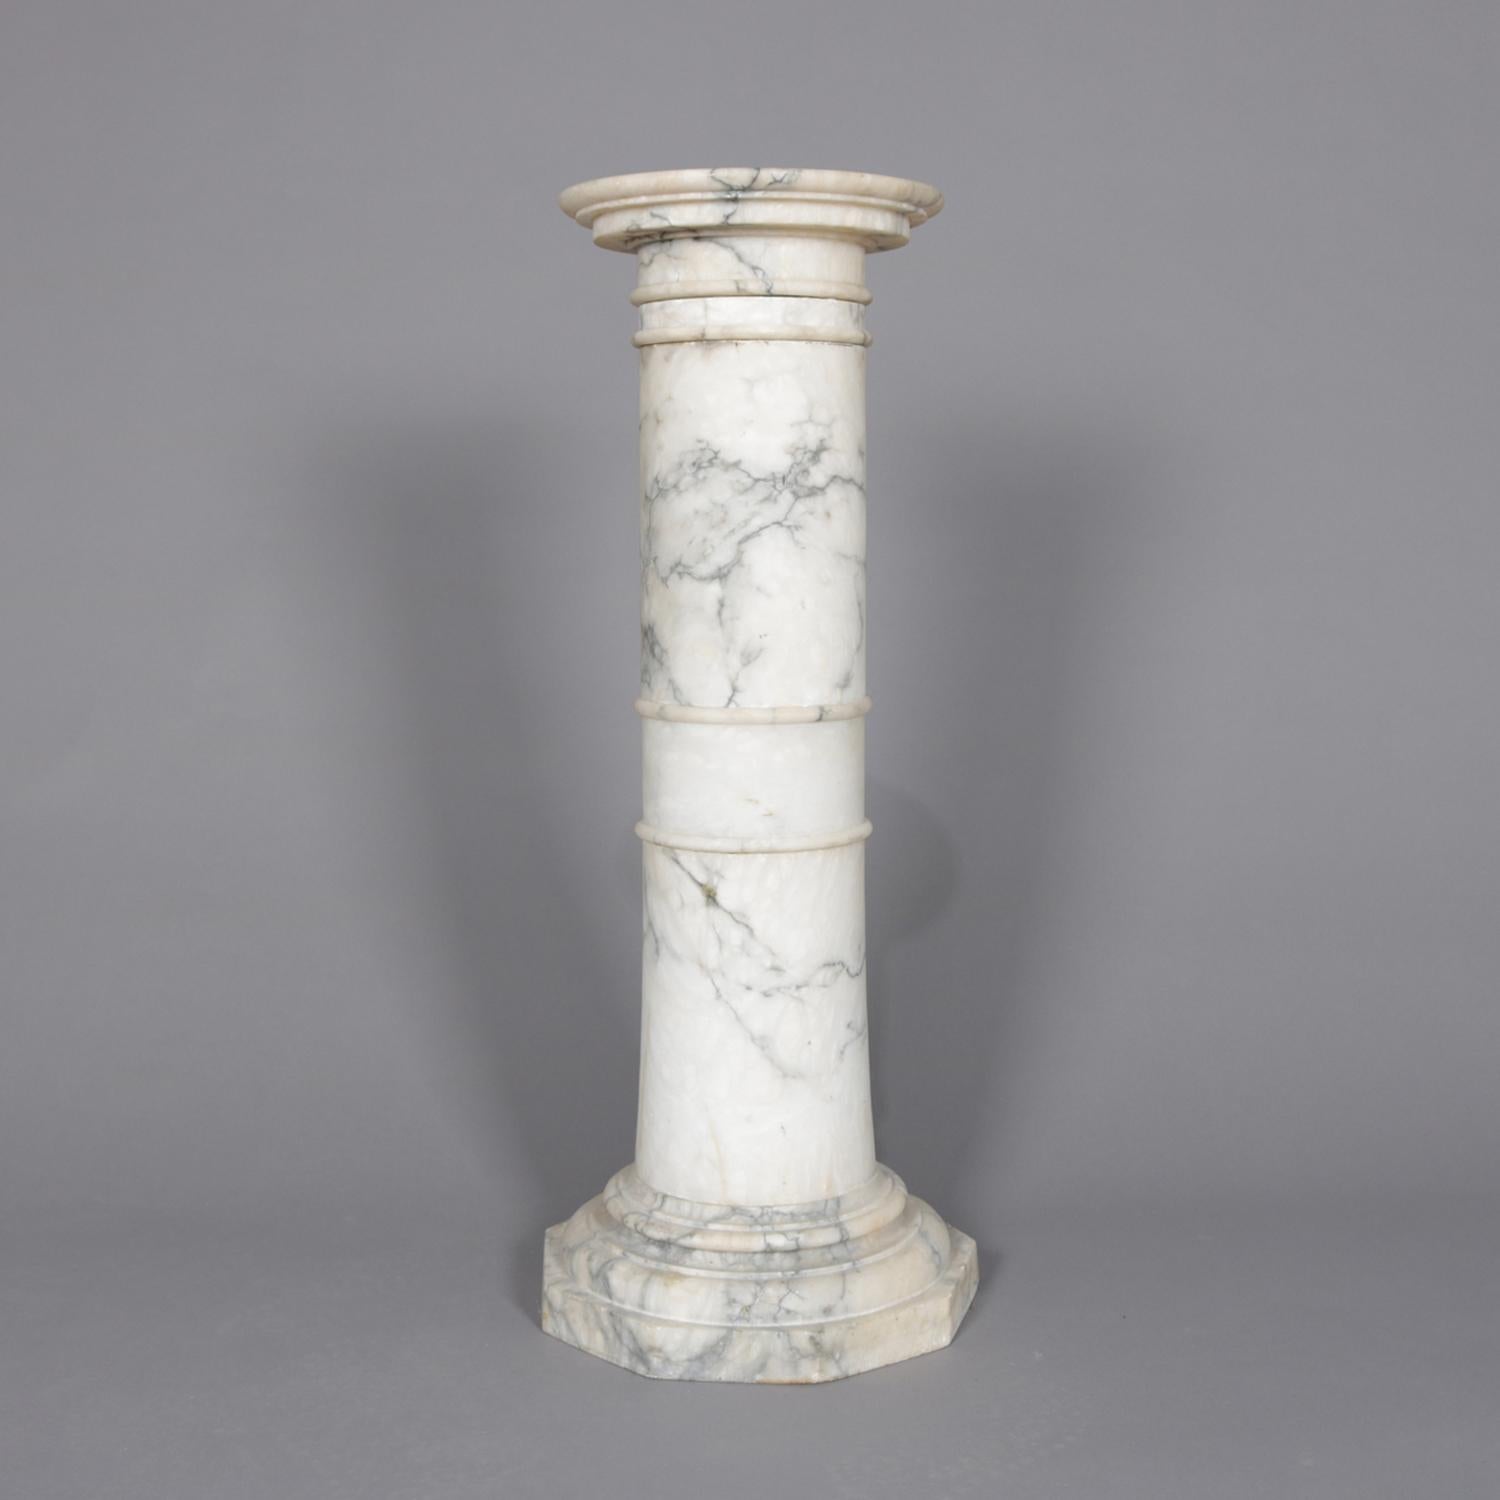 An antique Italian classical sculpture pedestal features carved marble construction in Corinthian column-form and having round display platform, marble with deep veining, circa 1890.

Measures: 35.5